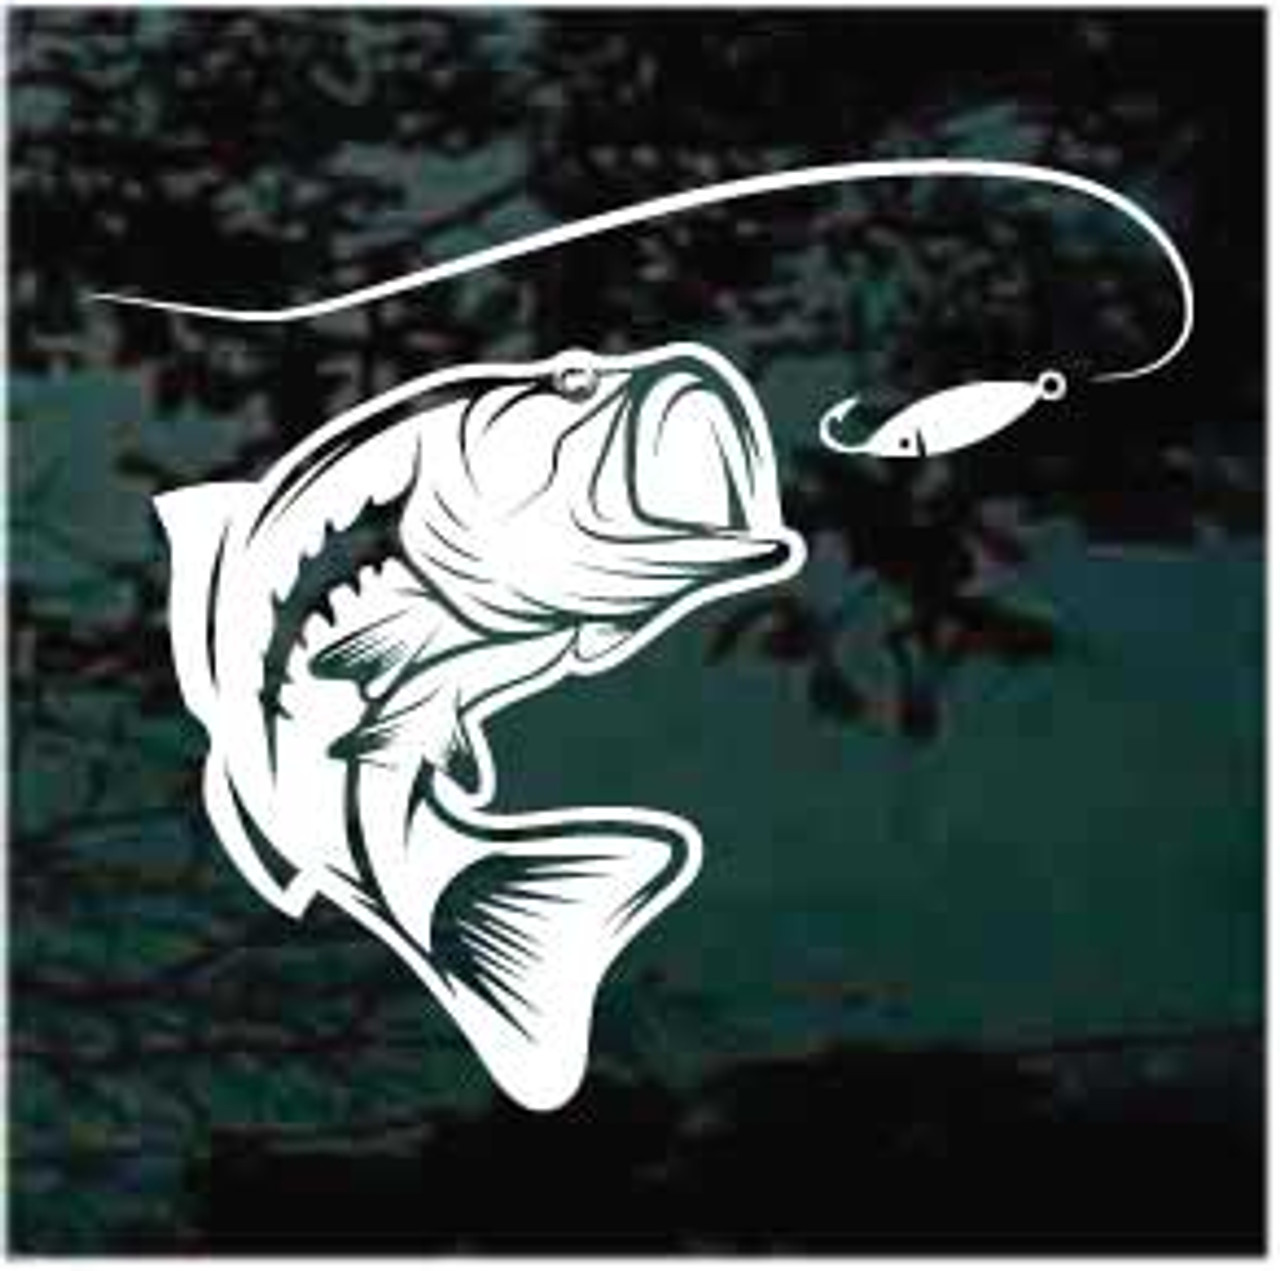 Large Mouth Bass Jumping After Lure Sticker for Sale by